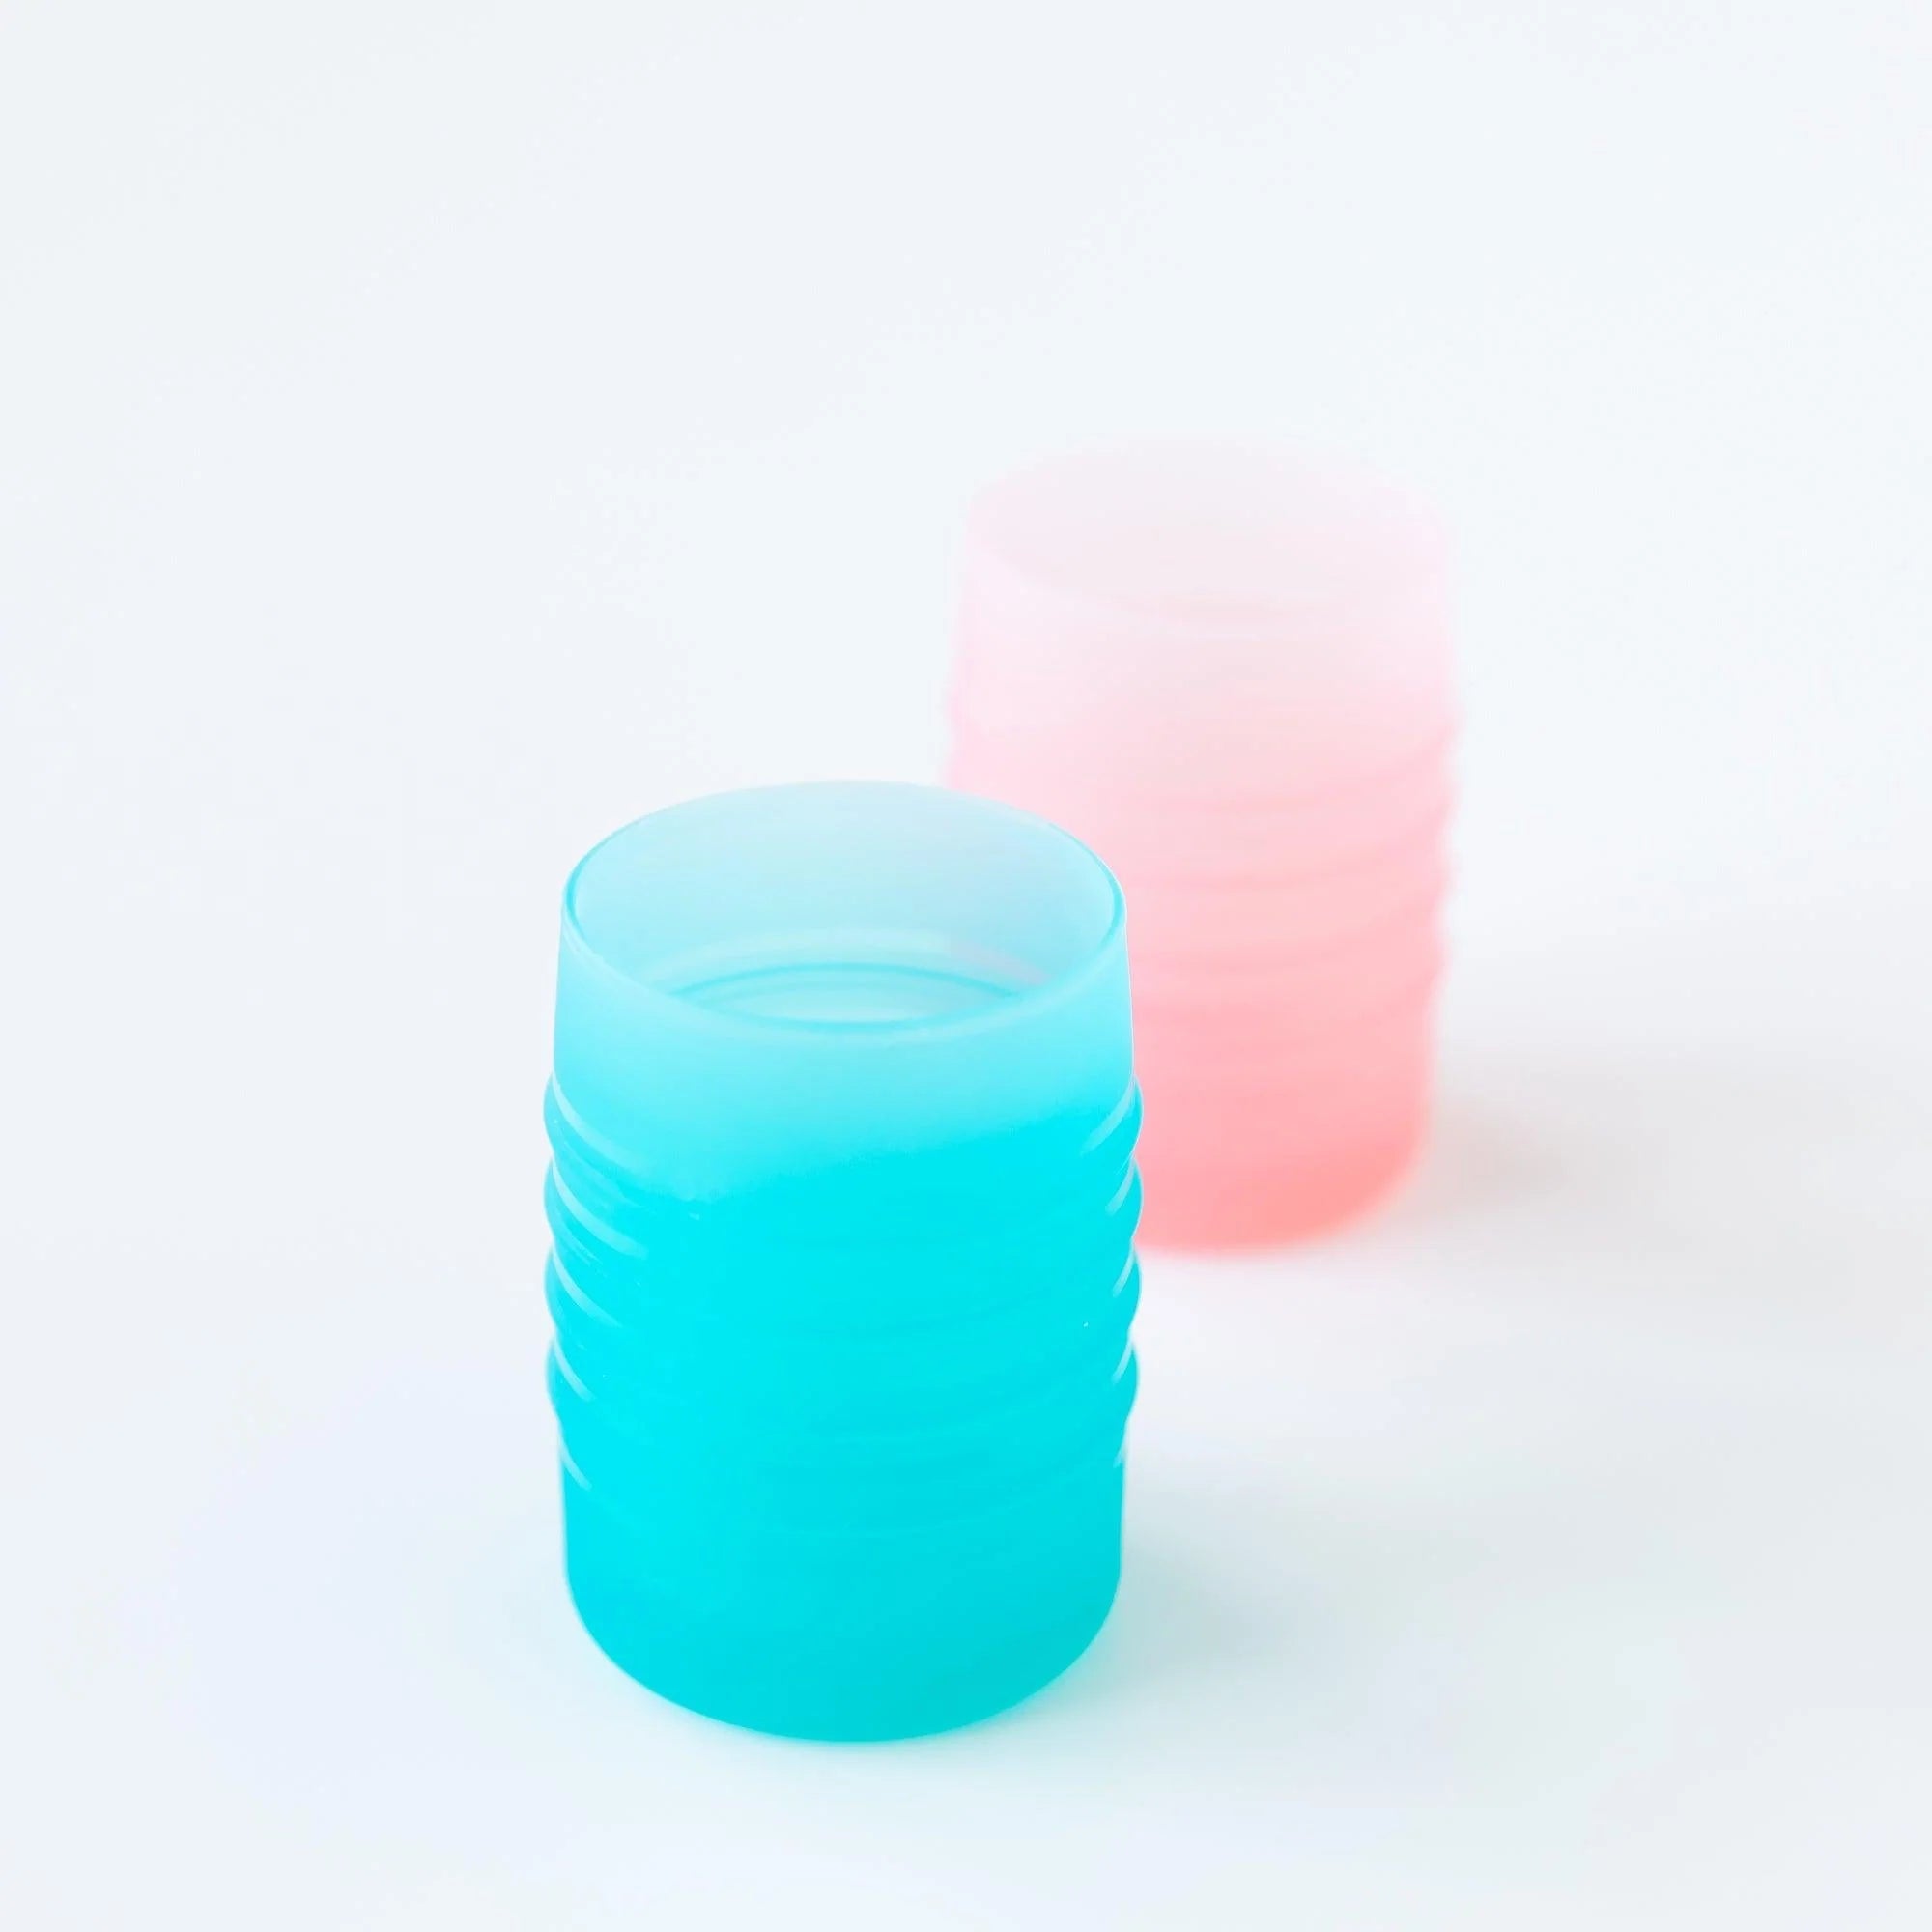 BLUE GINKGO Silicone Toddler Cups - Open Cup for Baby with Handles, Made  in Korea